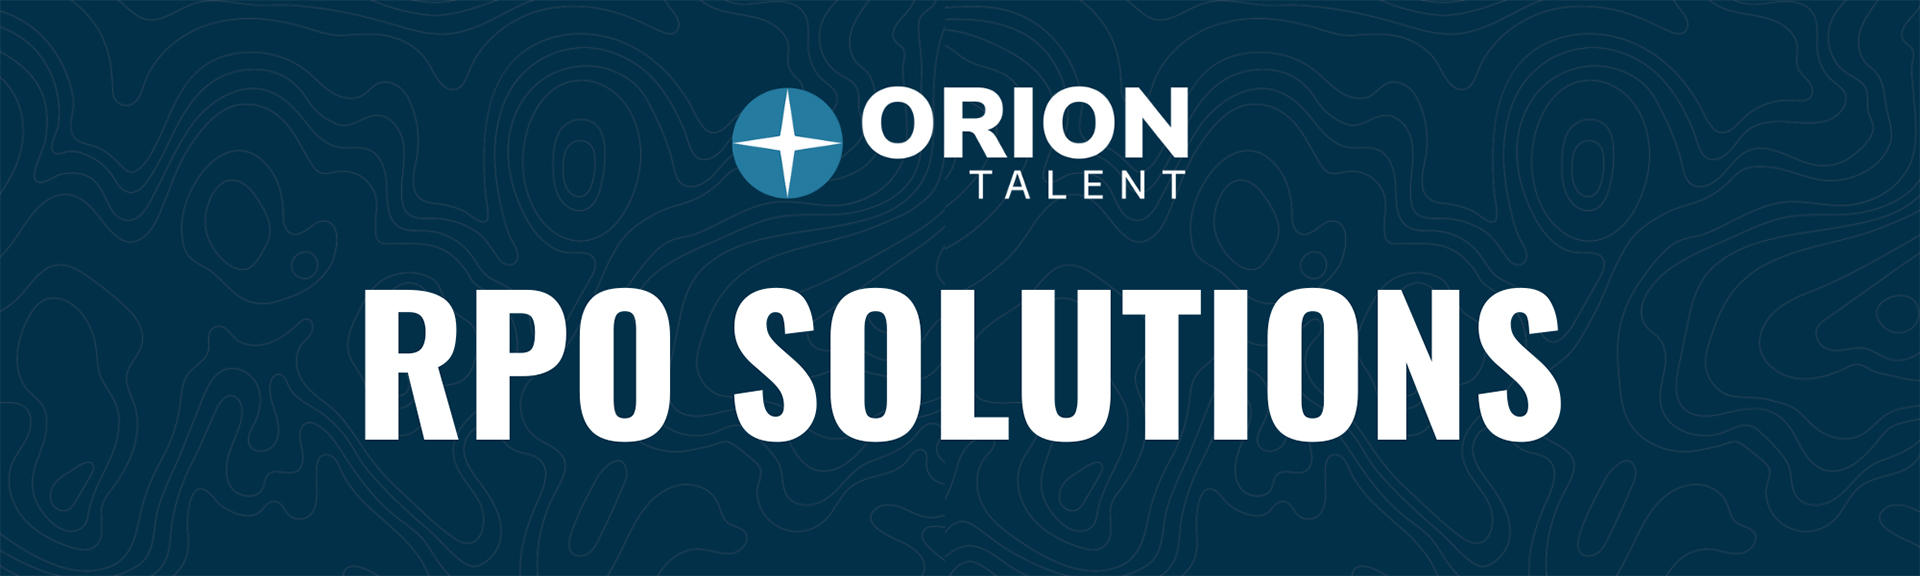 What is RPO? What is Recruitment Process Outsourcing? What does RPO mean? Learn about RPO with Orion Talent - the leading company in Recruitment Process Outsourcing for entire organizations, divisions, or large projects.